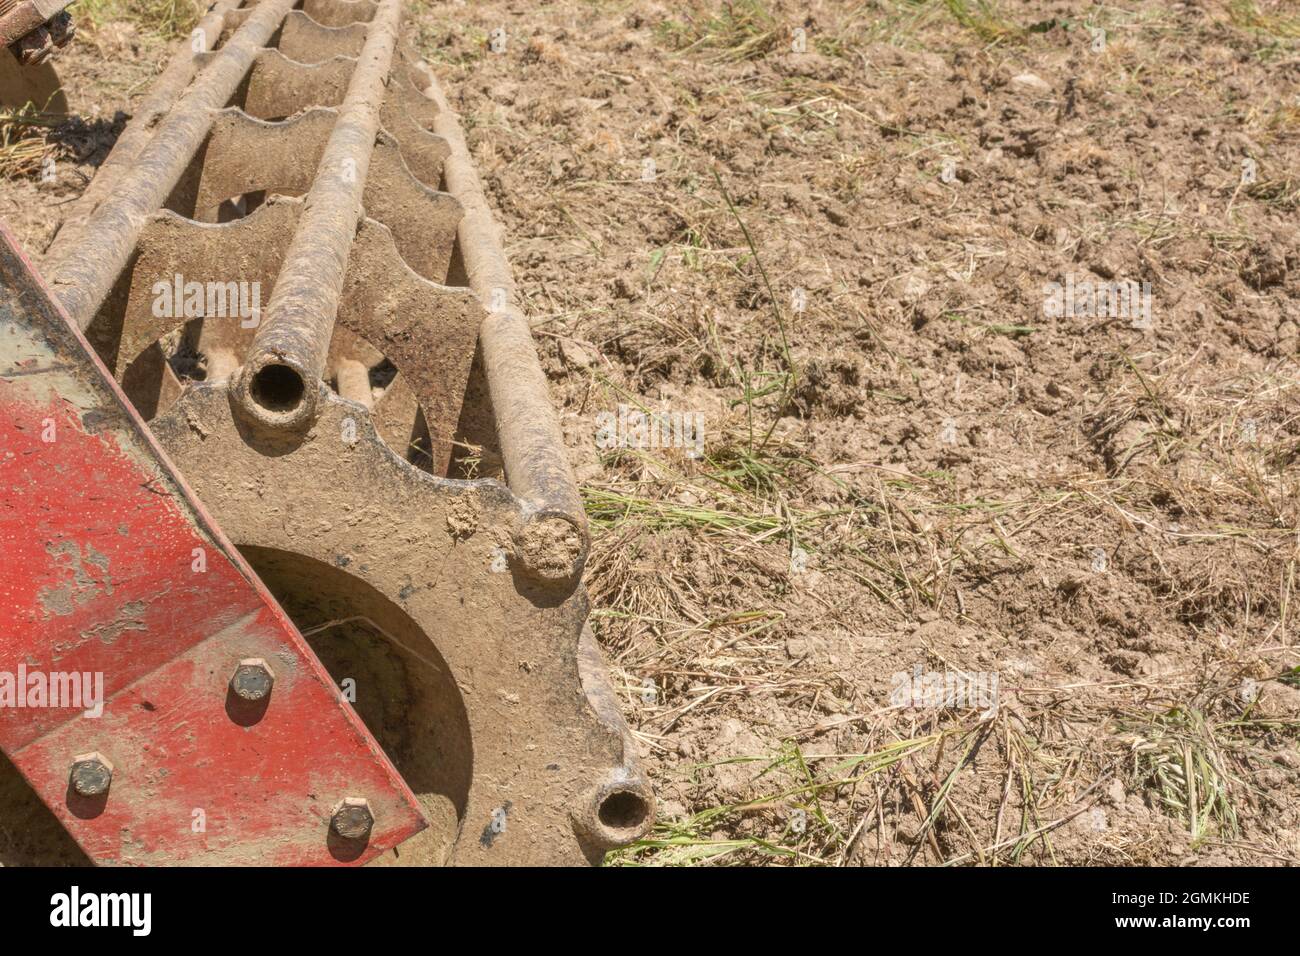 Disc cultivator or disc harrow farm equipment - not quite sure how to describe since has discs and clod breaker rollers. For UK farming & agriculture Stock Photo